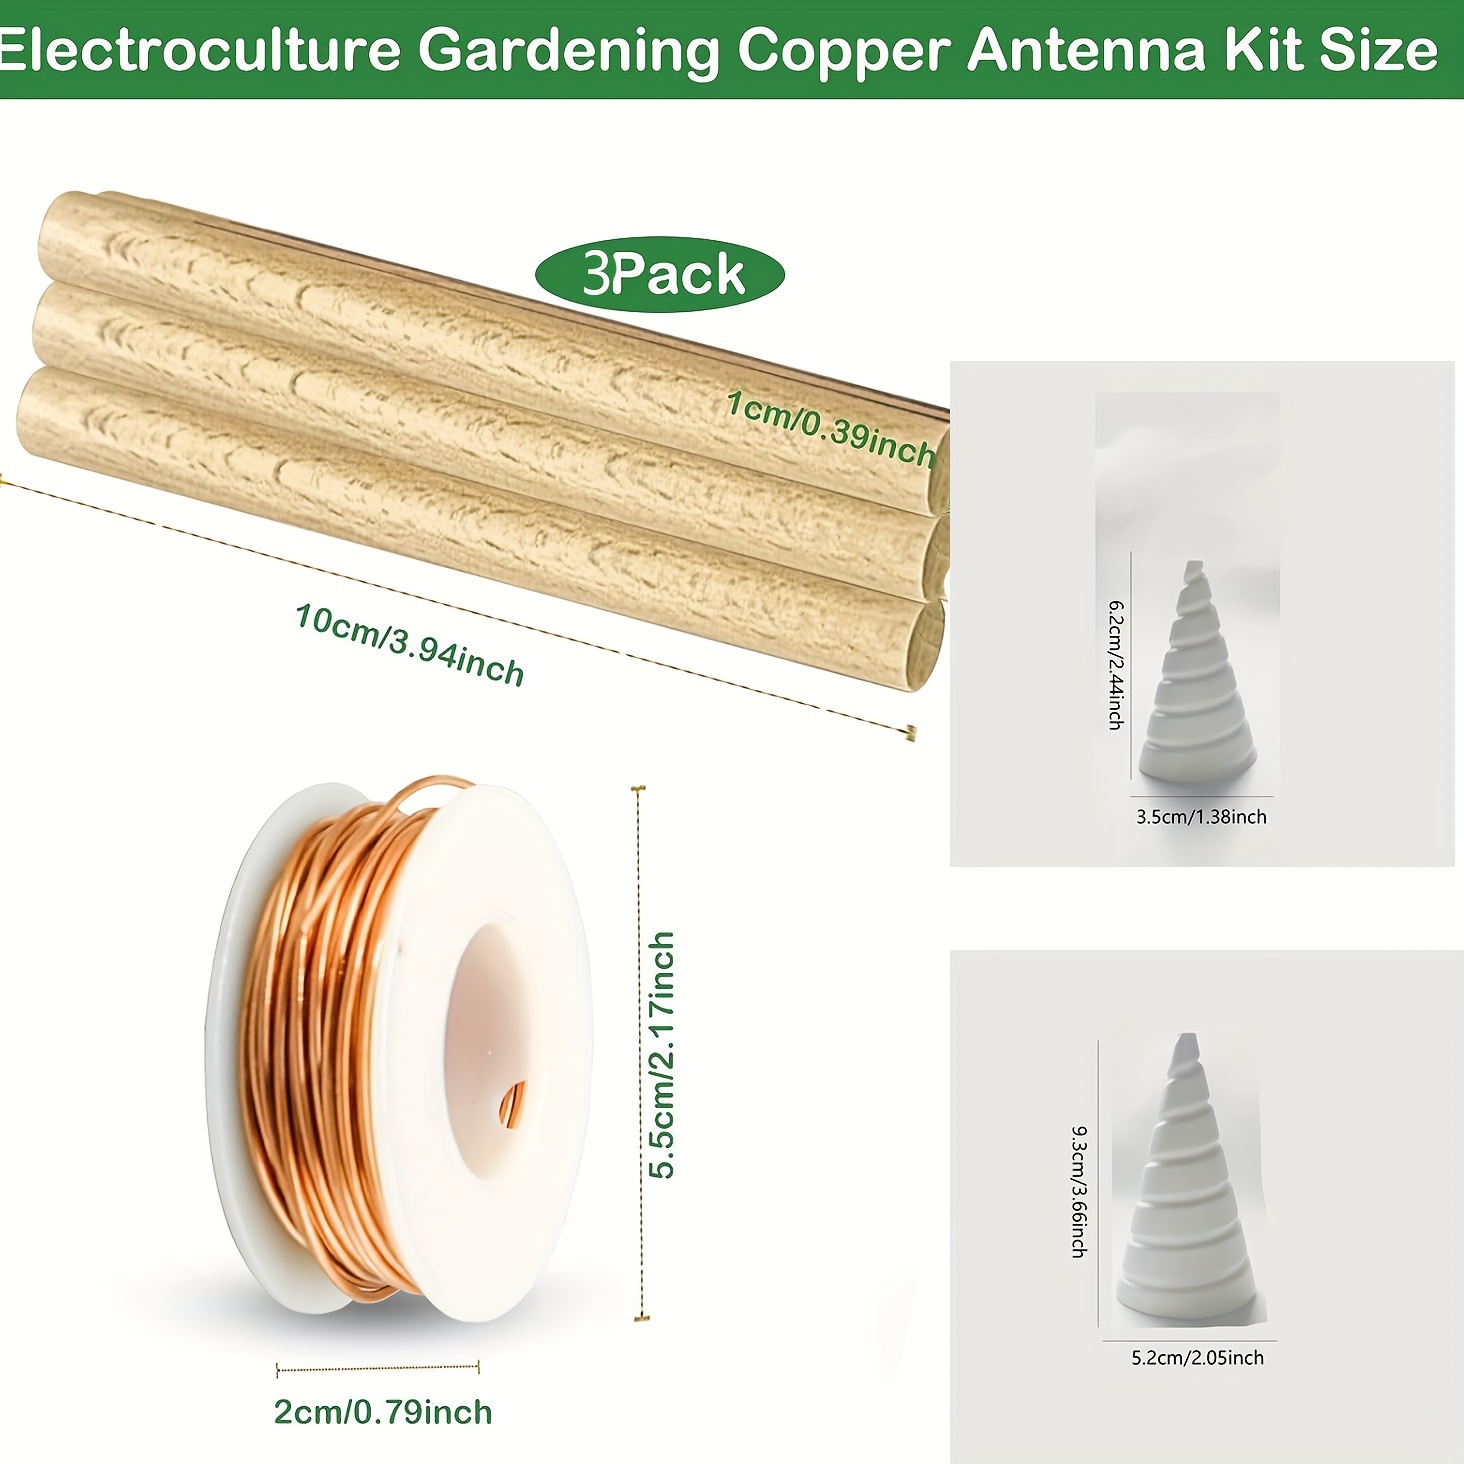 Copper Coil for Gardening, Copper Wire for Electroculture, 5 Pack Copper  Garden Stakes for Plants,16 Gauge Copper Wire with Fibonacci Coil Winding  Jig